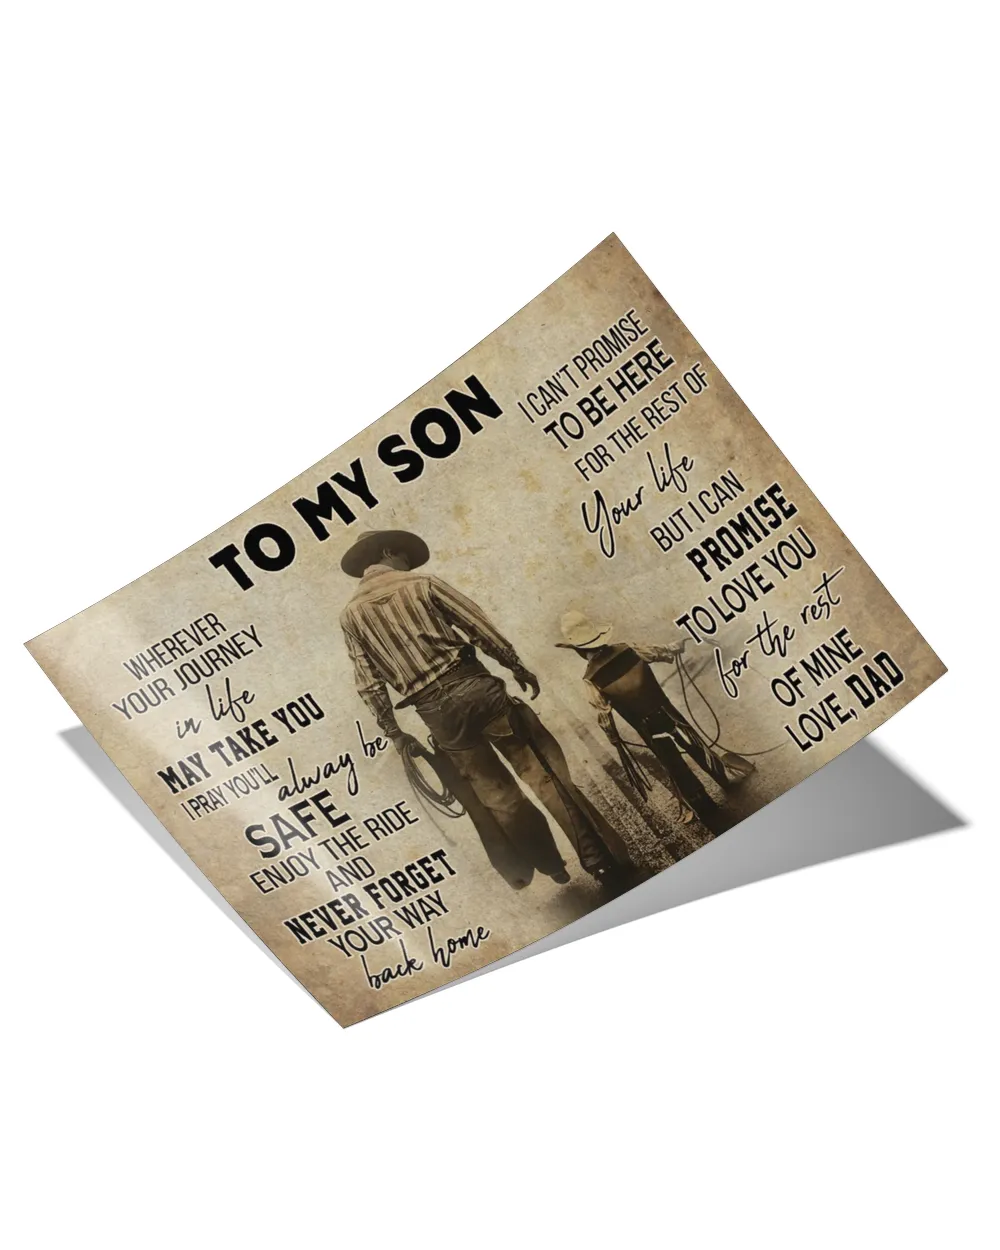 cowboy dad to my son v2 home decor wall horizontal poster ideal gift